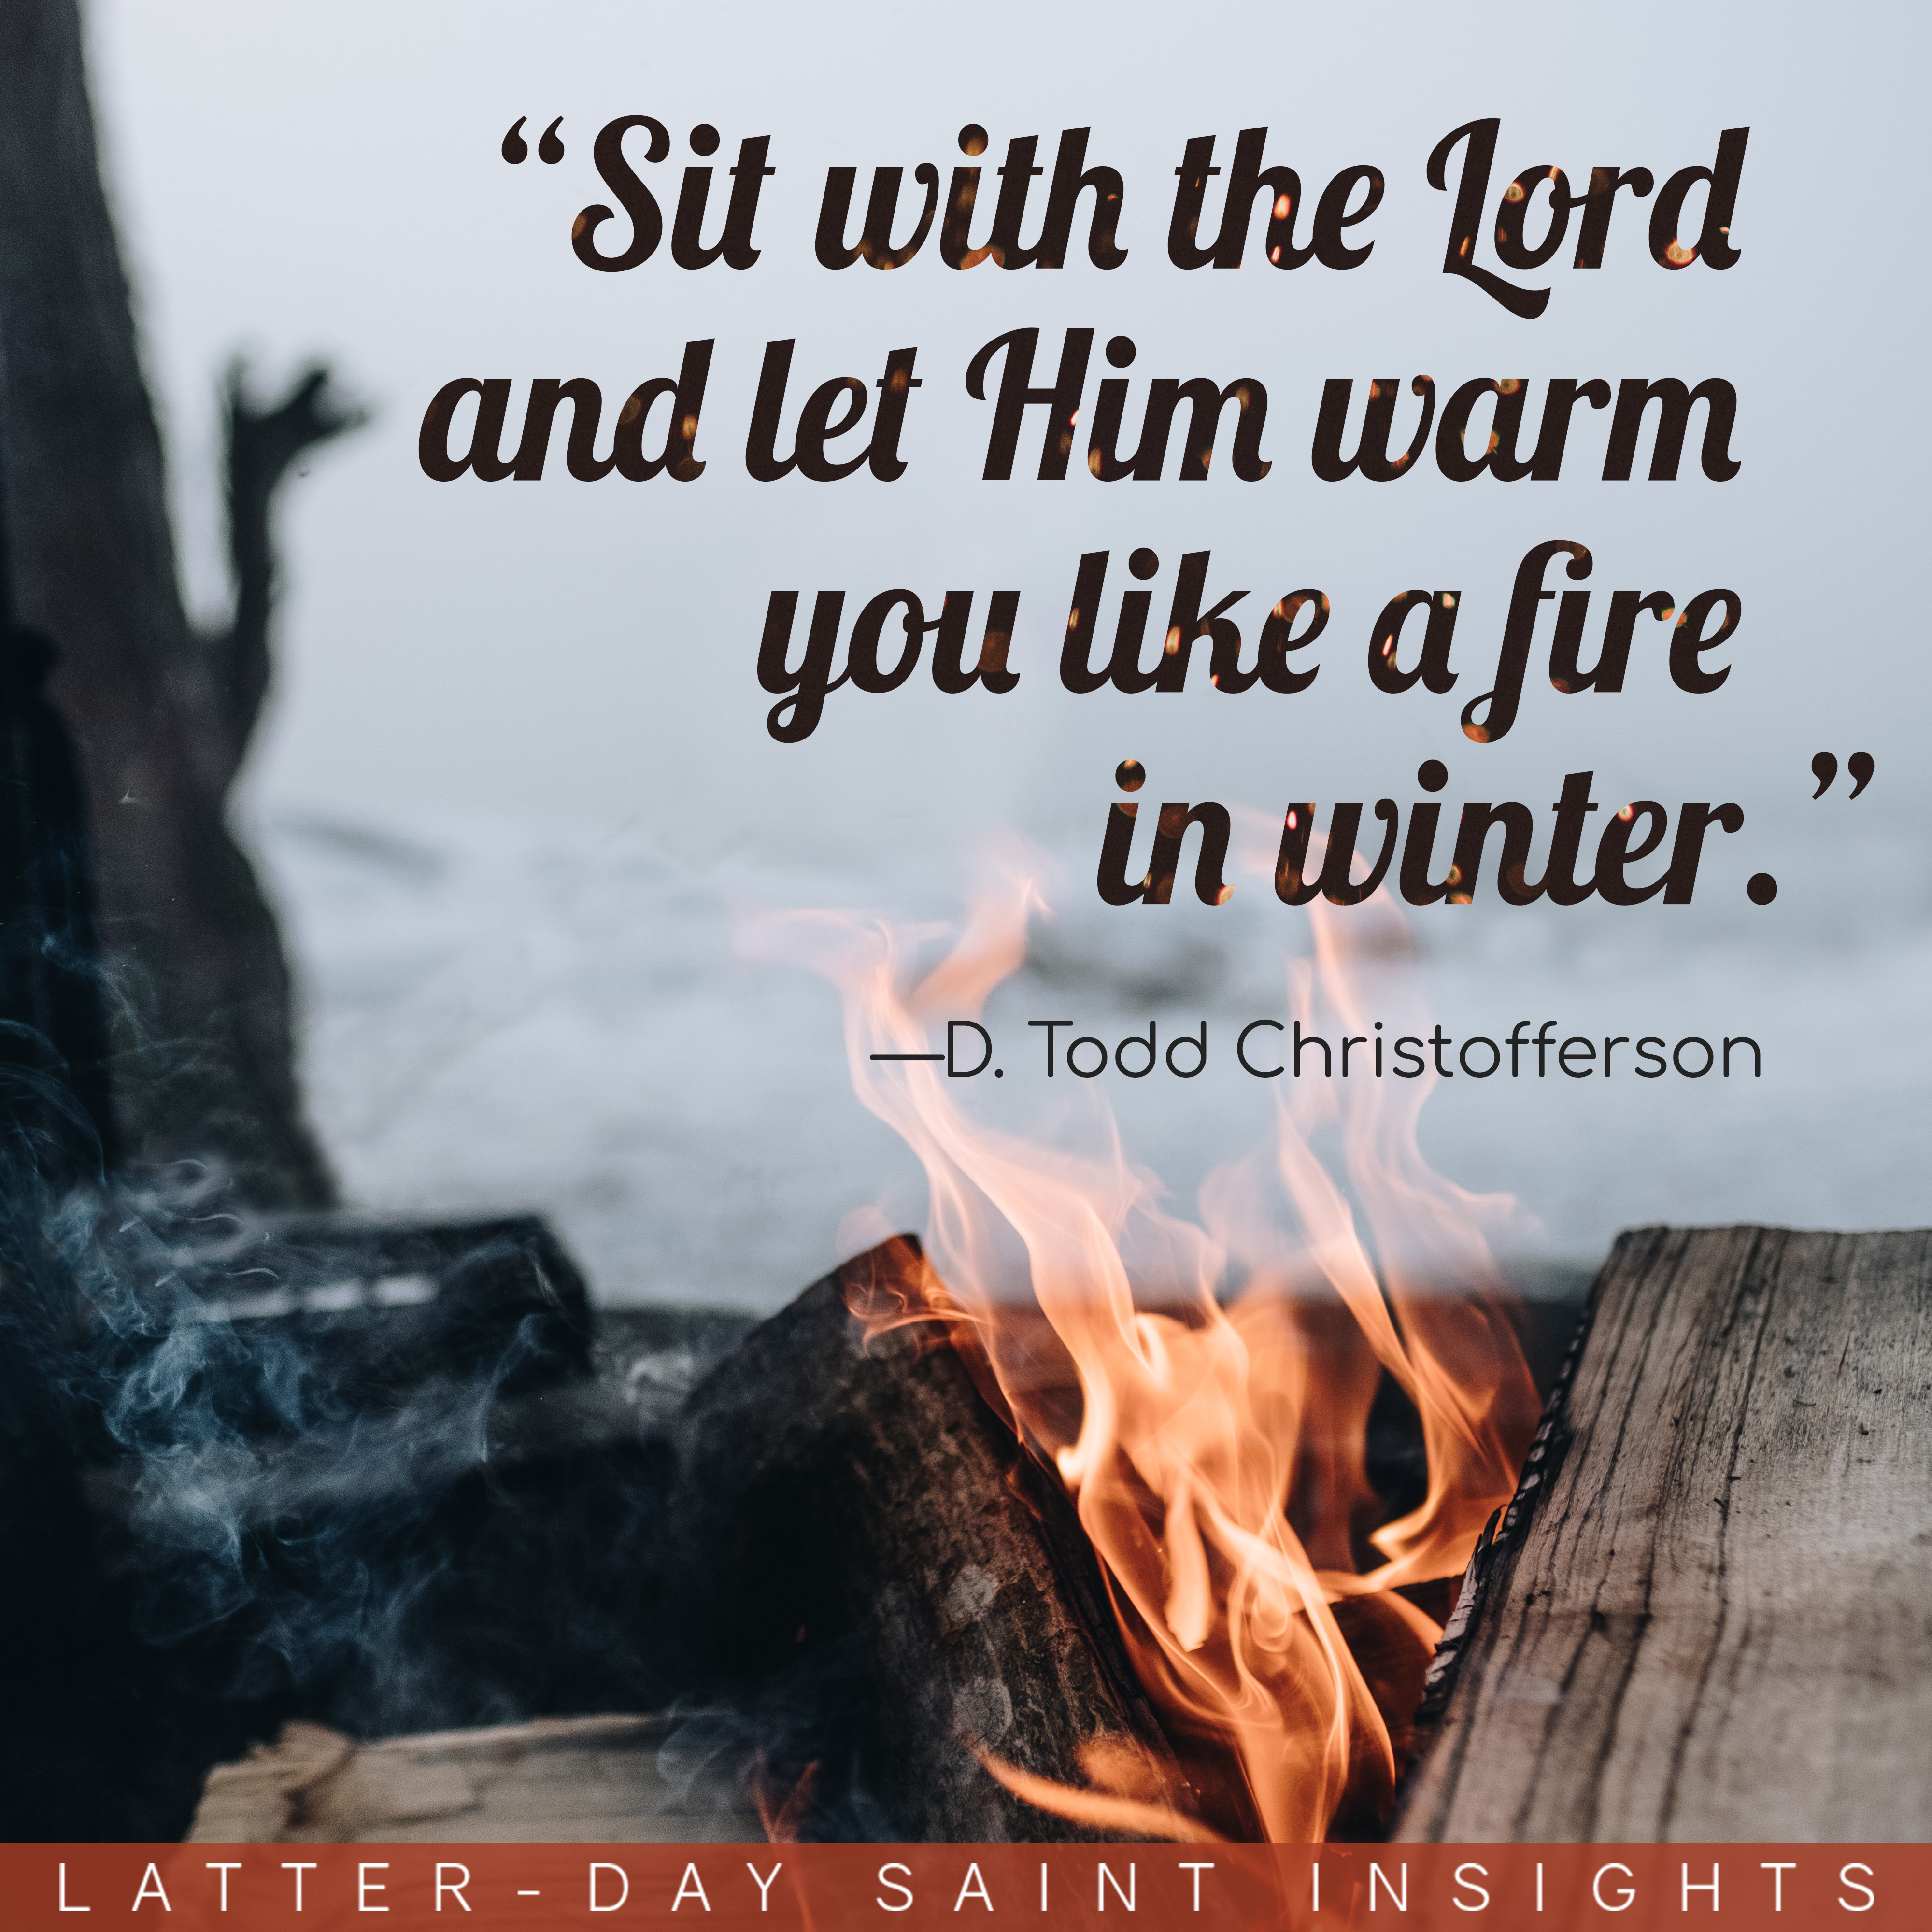 Fire against a snowy landscape with a quote by D. Todd Christofferson that says, "Sit with the Lord and let Him warm you like a fire in winter."